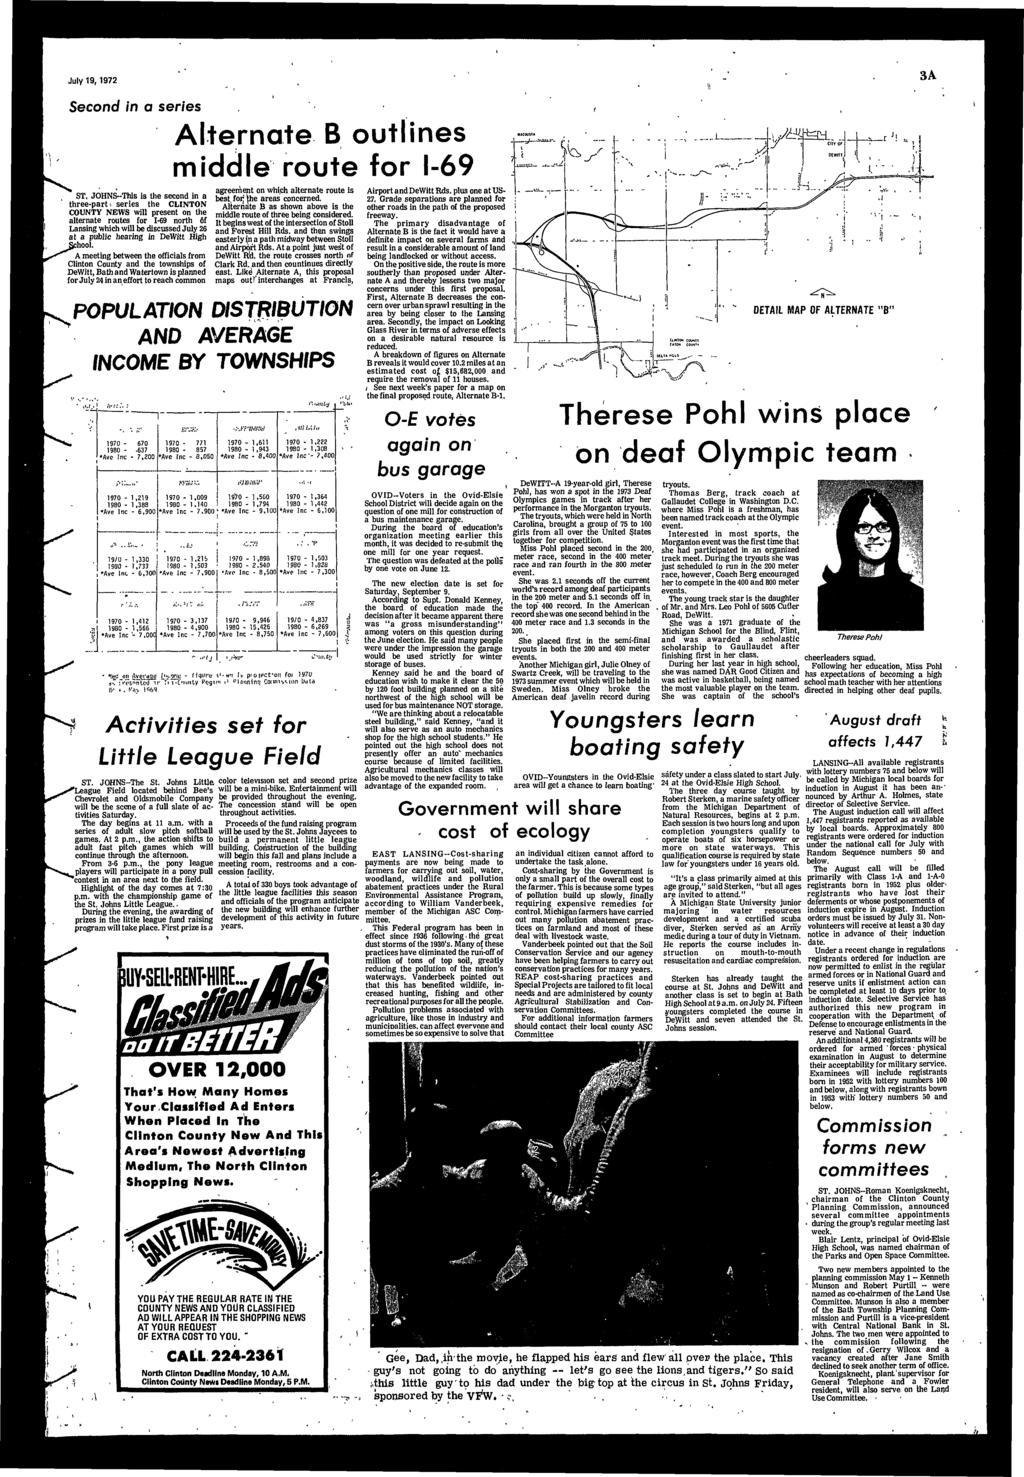 July 19,1972 3A Second n a seres Alternate B outlnes mddle route for I-69 ST, JOHNS-Ths s the second n a three-part^ seres the CLINTON COUNTY NEWS wll present on the alternate routes for 1-69 north